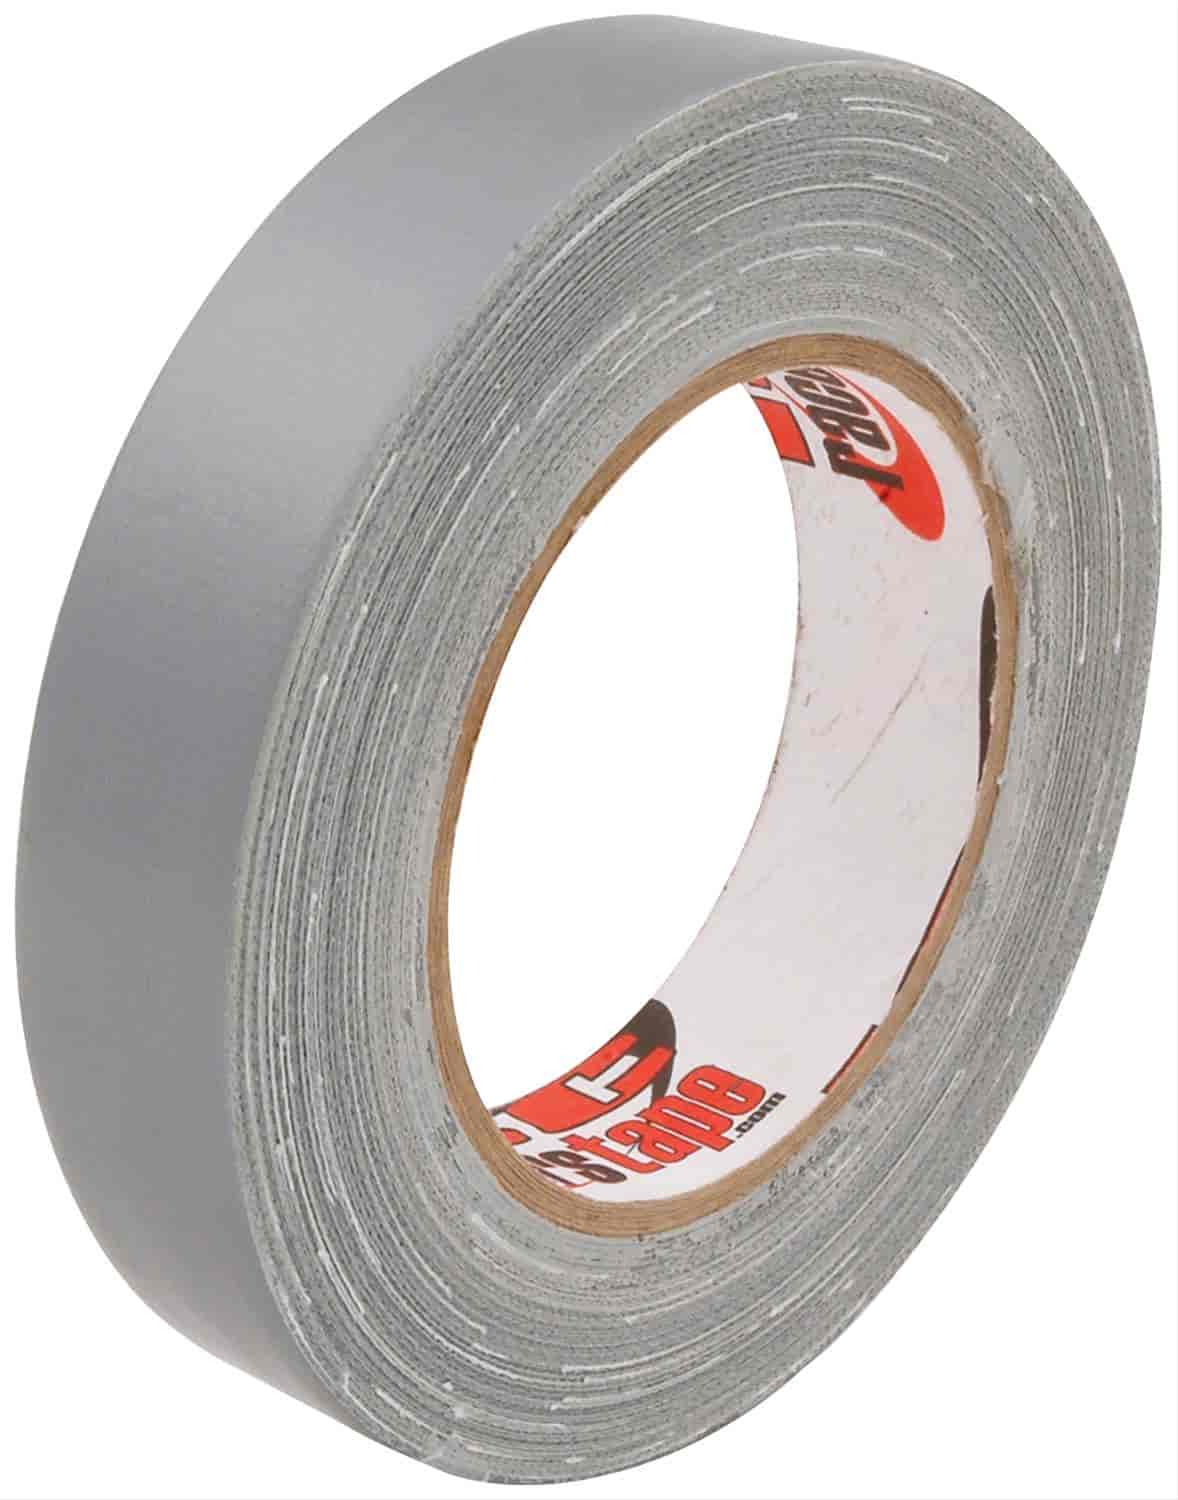 1" x 90" Racer"s Tape Silver